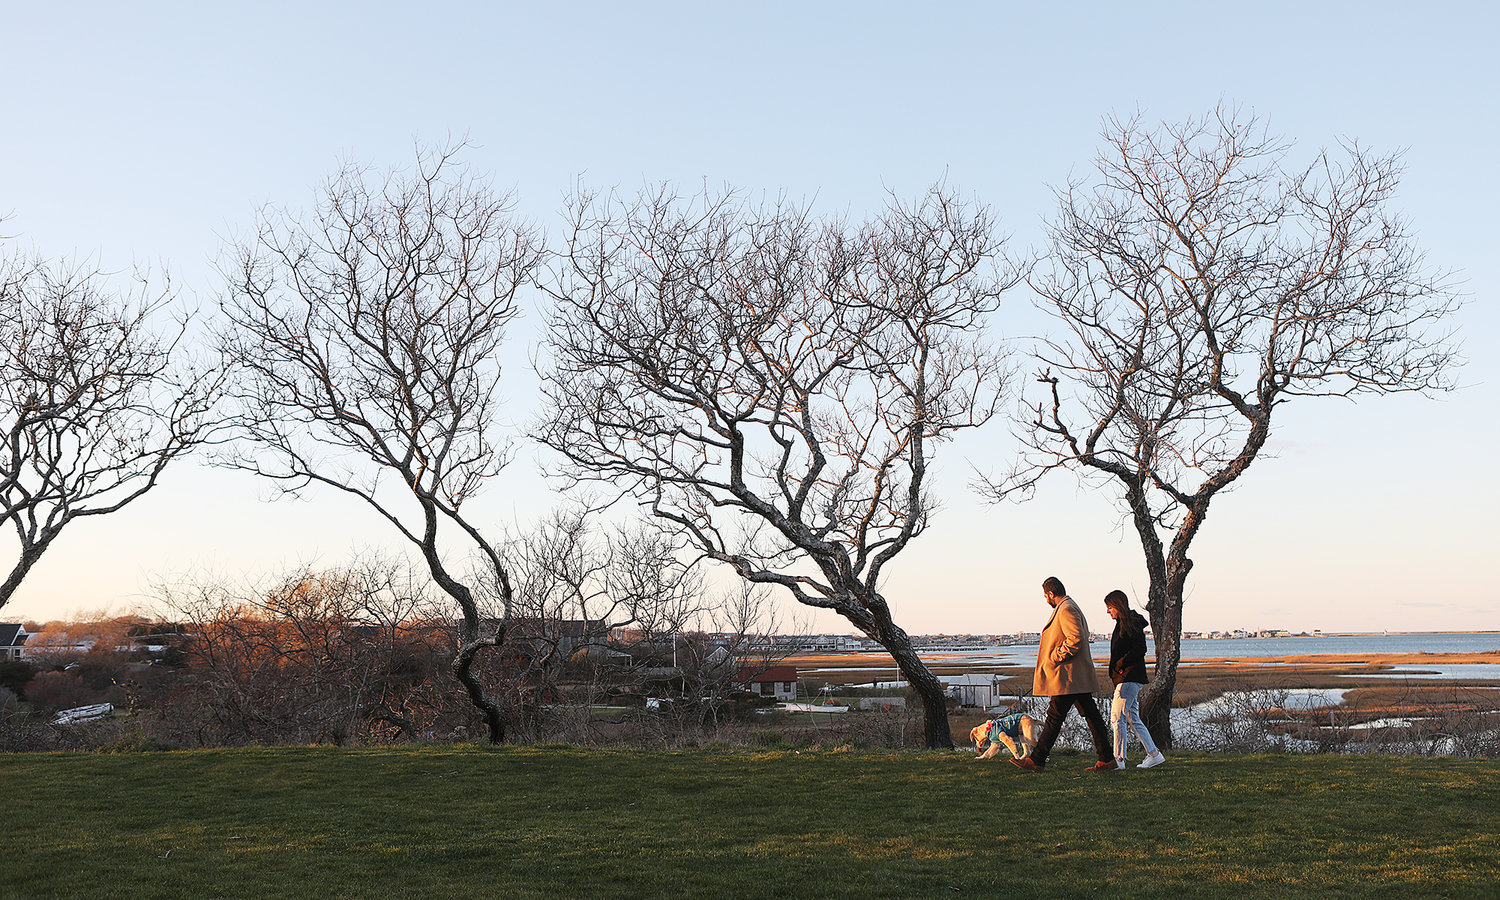 Adi Pathak, of Boston, and Nantucketer Rachael Foulkes walk a friend's dog, Cinnamon, on on a Saturday evening in late November as they enjoy the view of the creeks and harbor from the new Land Bank Creeks Preserve.